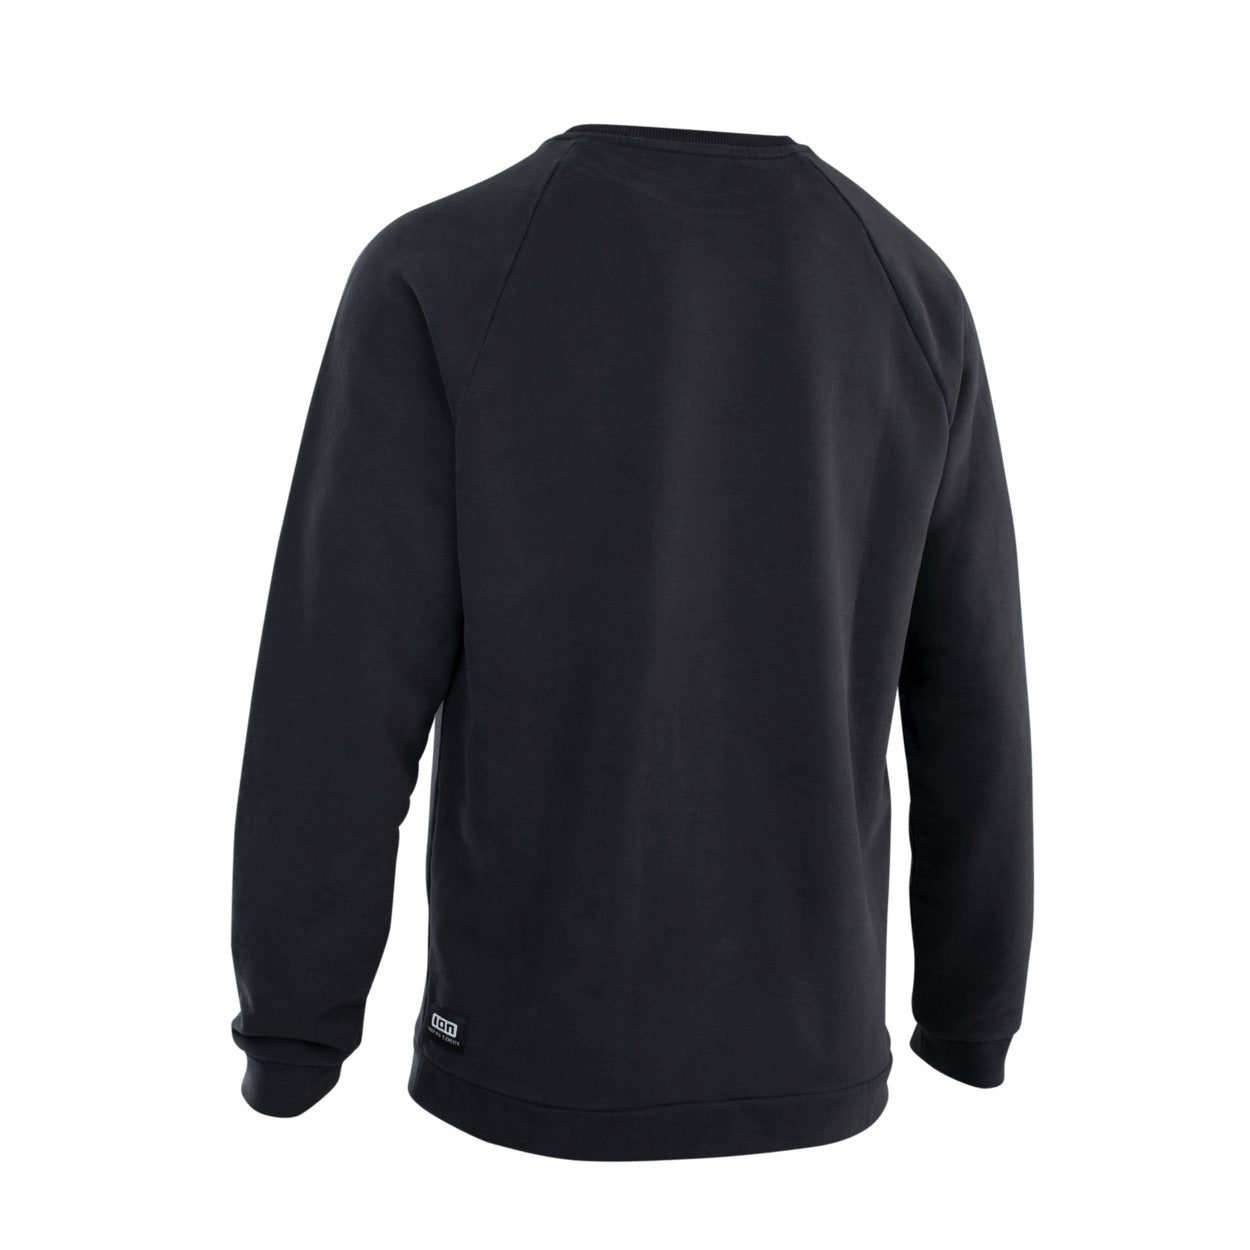 ION Men Sweater Surfing Elements 2023 - Worthing Watersports - 9010583032542 - Apparel - ION Bike